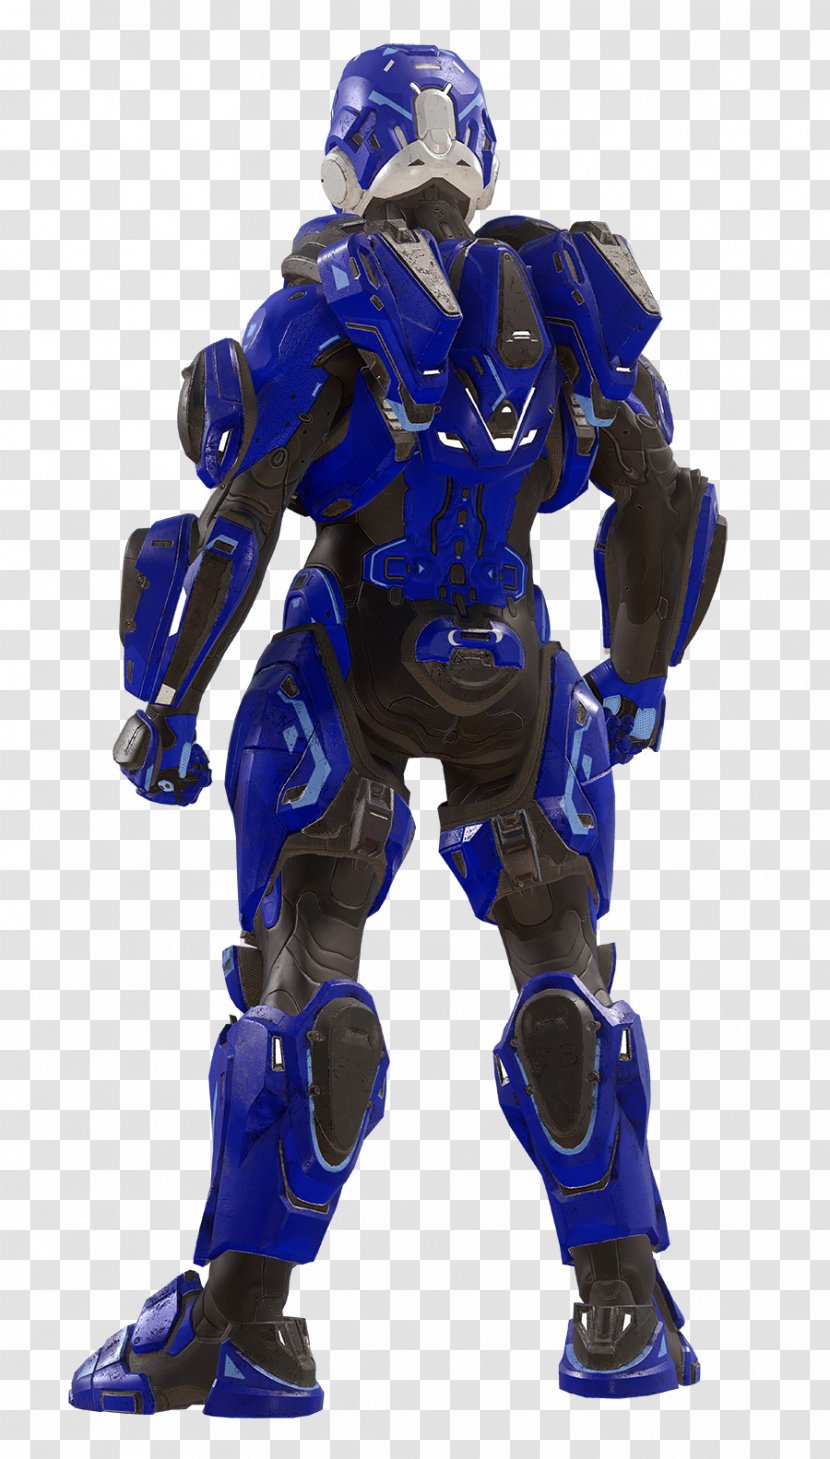 Halo 5: Guardians 4 Halo: Combat Evolved Anniversary Wars 3 - Electric Blue - Yellow Transparent PNG